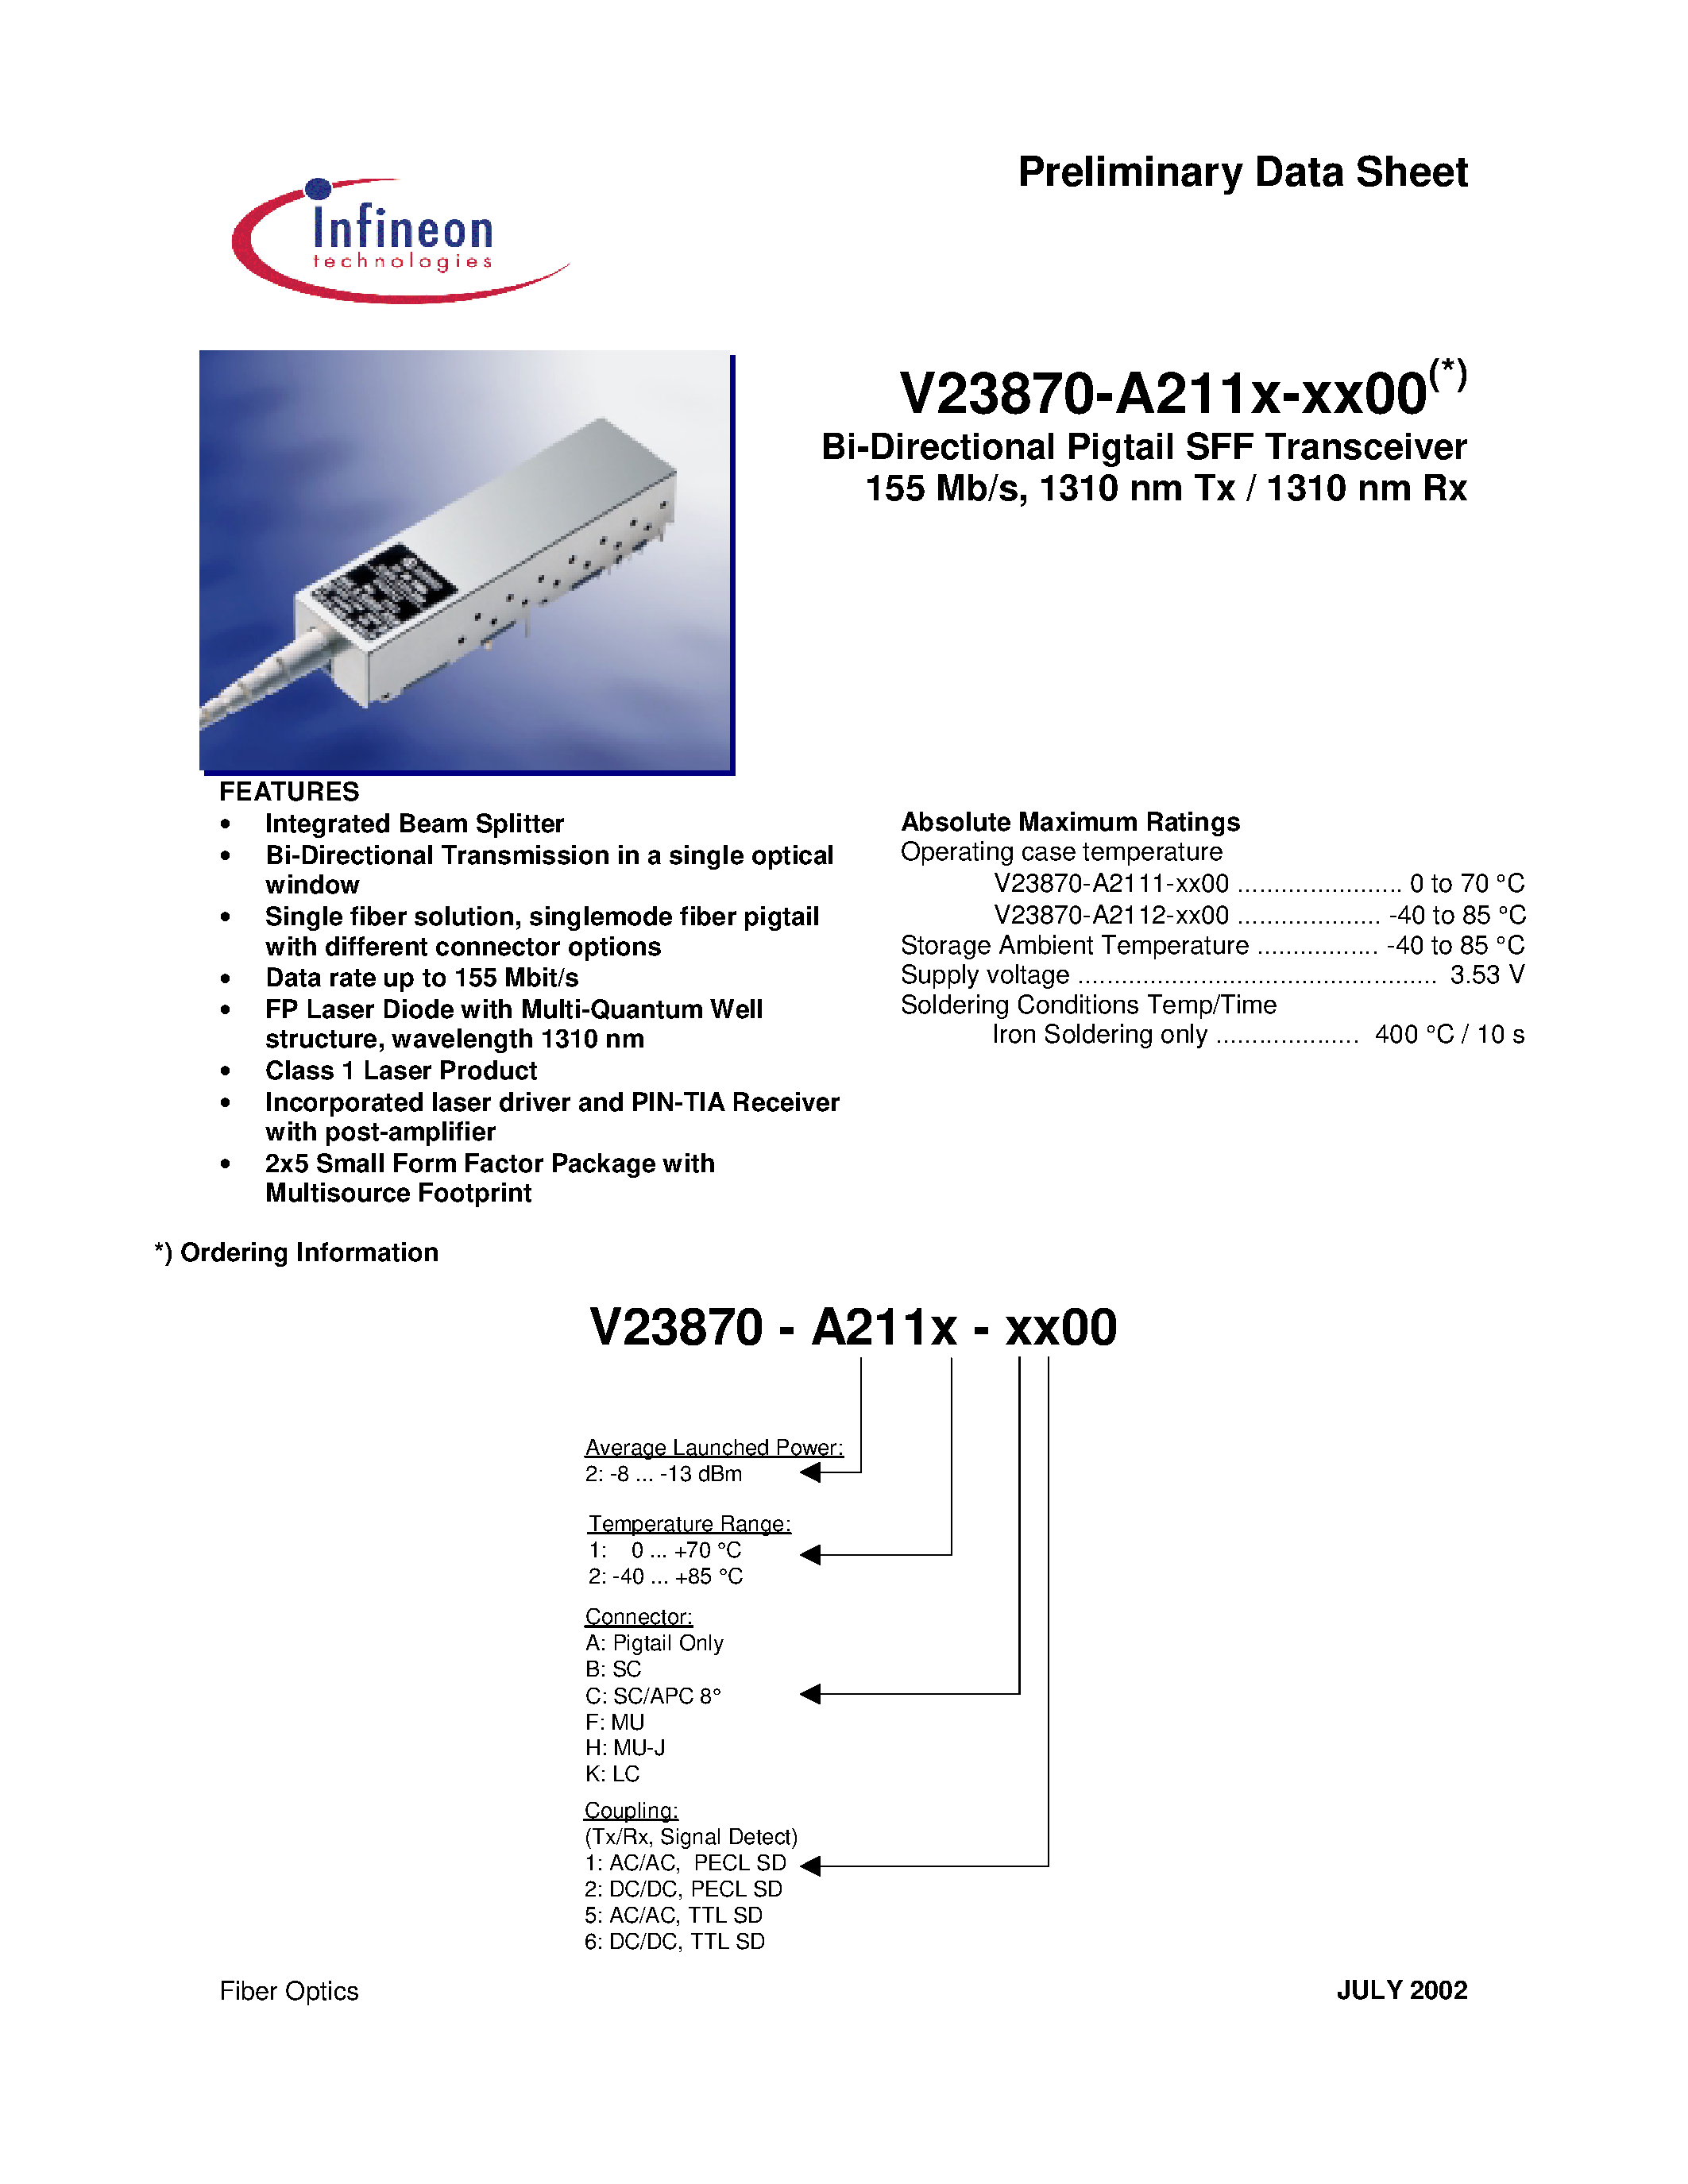 Datasheet V23870-A2111-H100 - Bi-Directional Pigtail SFF Transceiver 155 Mb/s/ 1310 nm Tx / 1310 nm Rx page 1